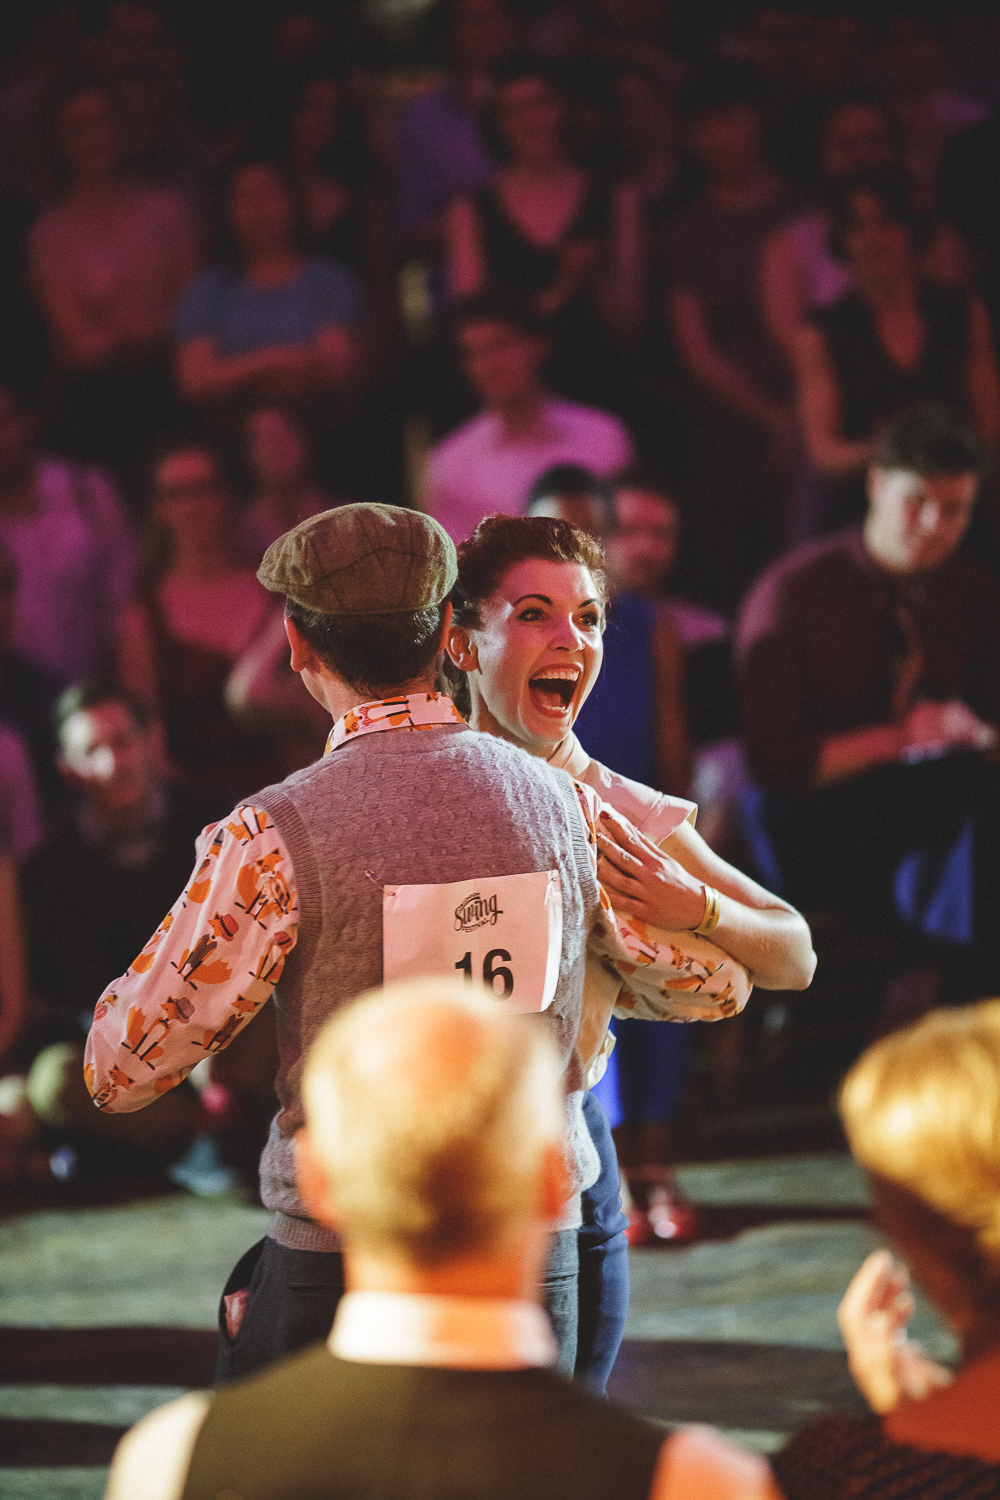  The London Swing Festival 2015 - The Opening Party. Photo Credit: For Dancers Only (http://d.pr/1fEEY) - http://www.ebobrie.com/london-swing-festival-2015/ 